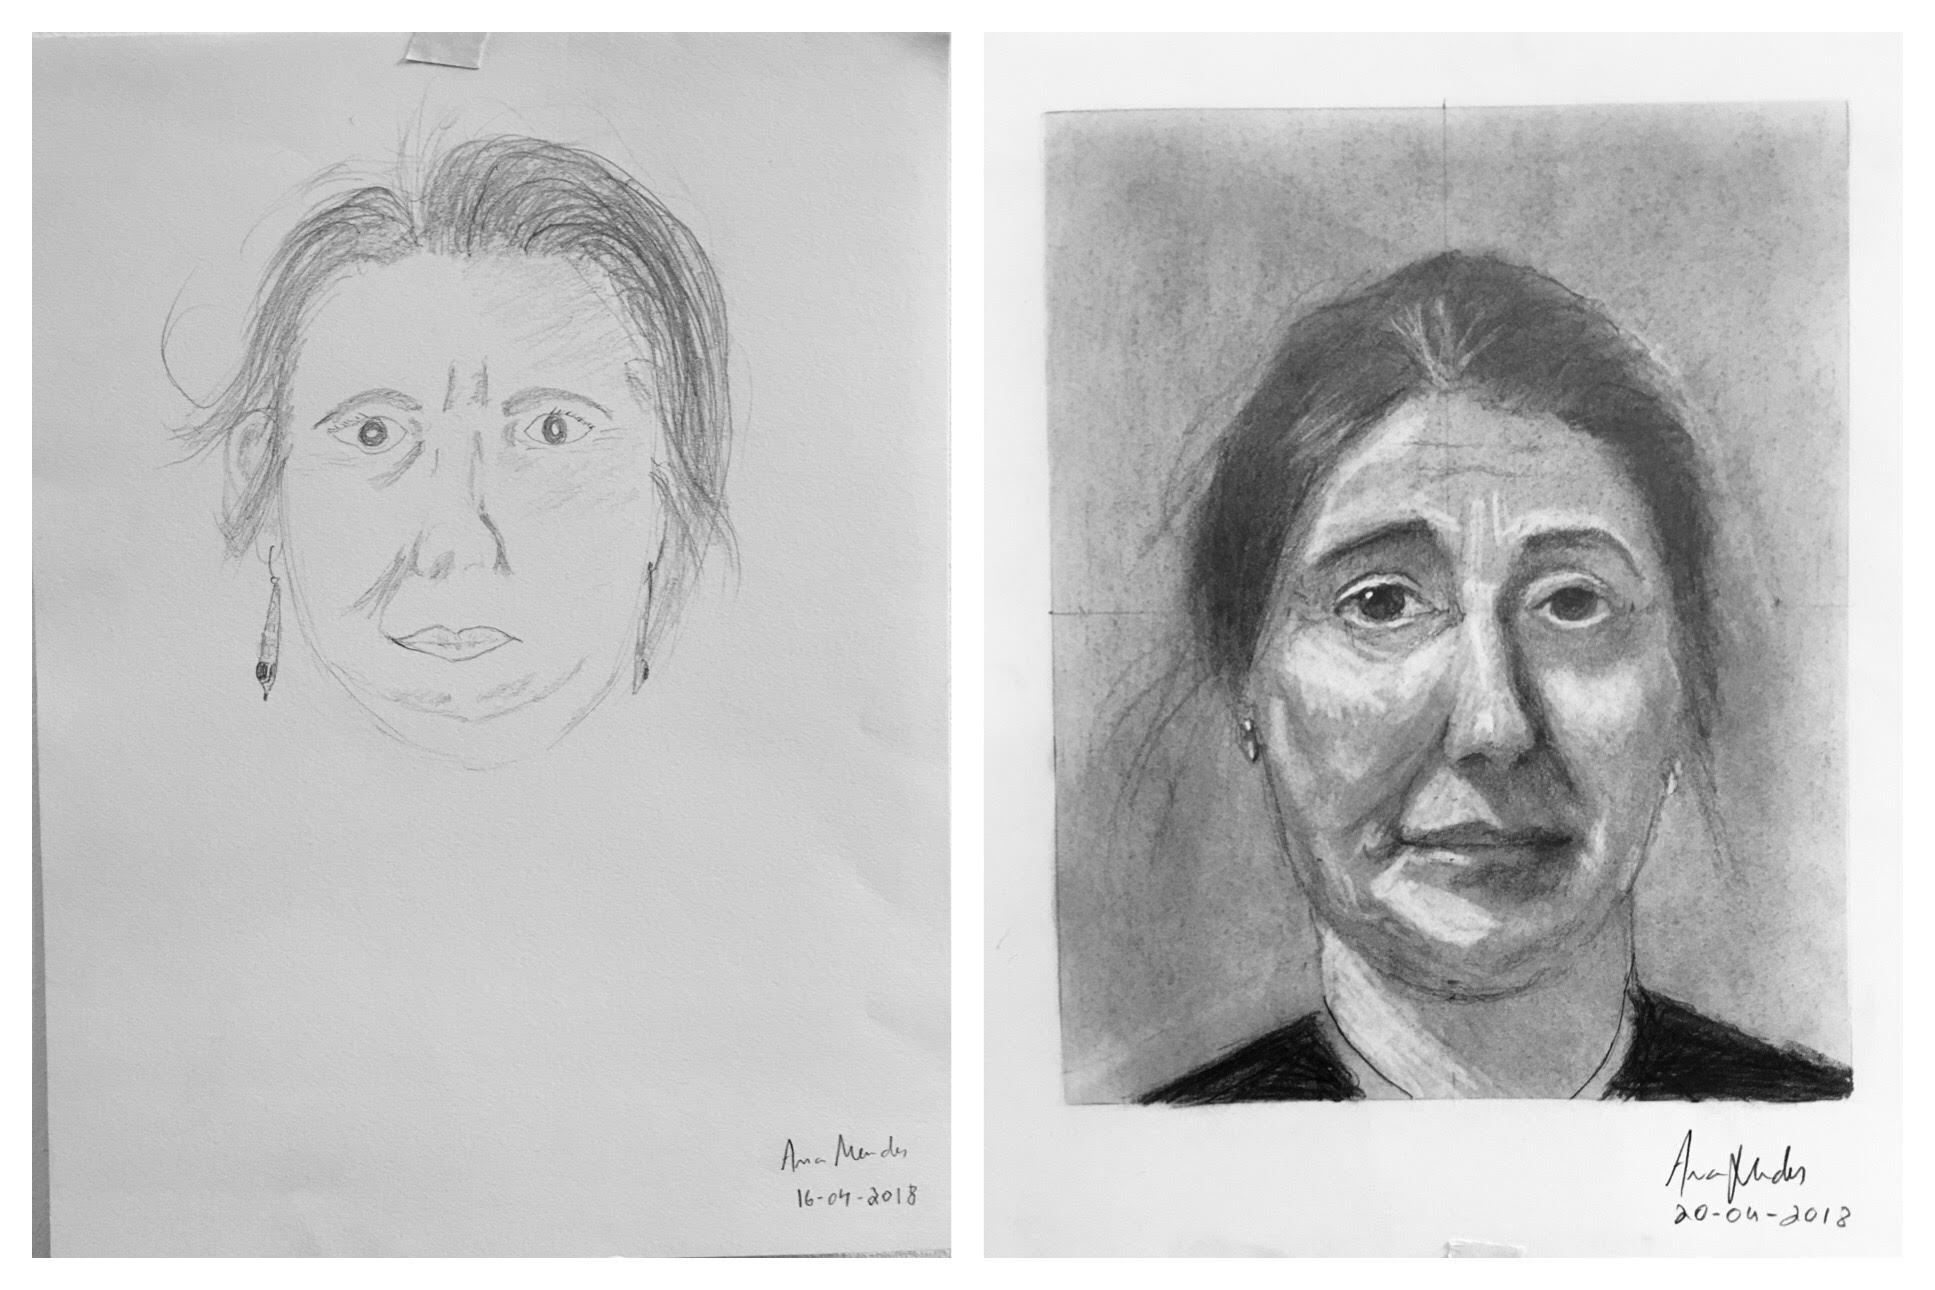 Ana's Before and After Self-Portrait April 2018